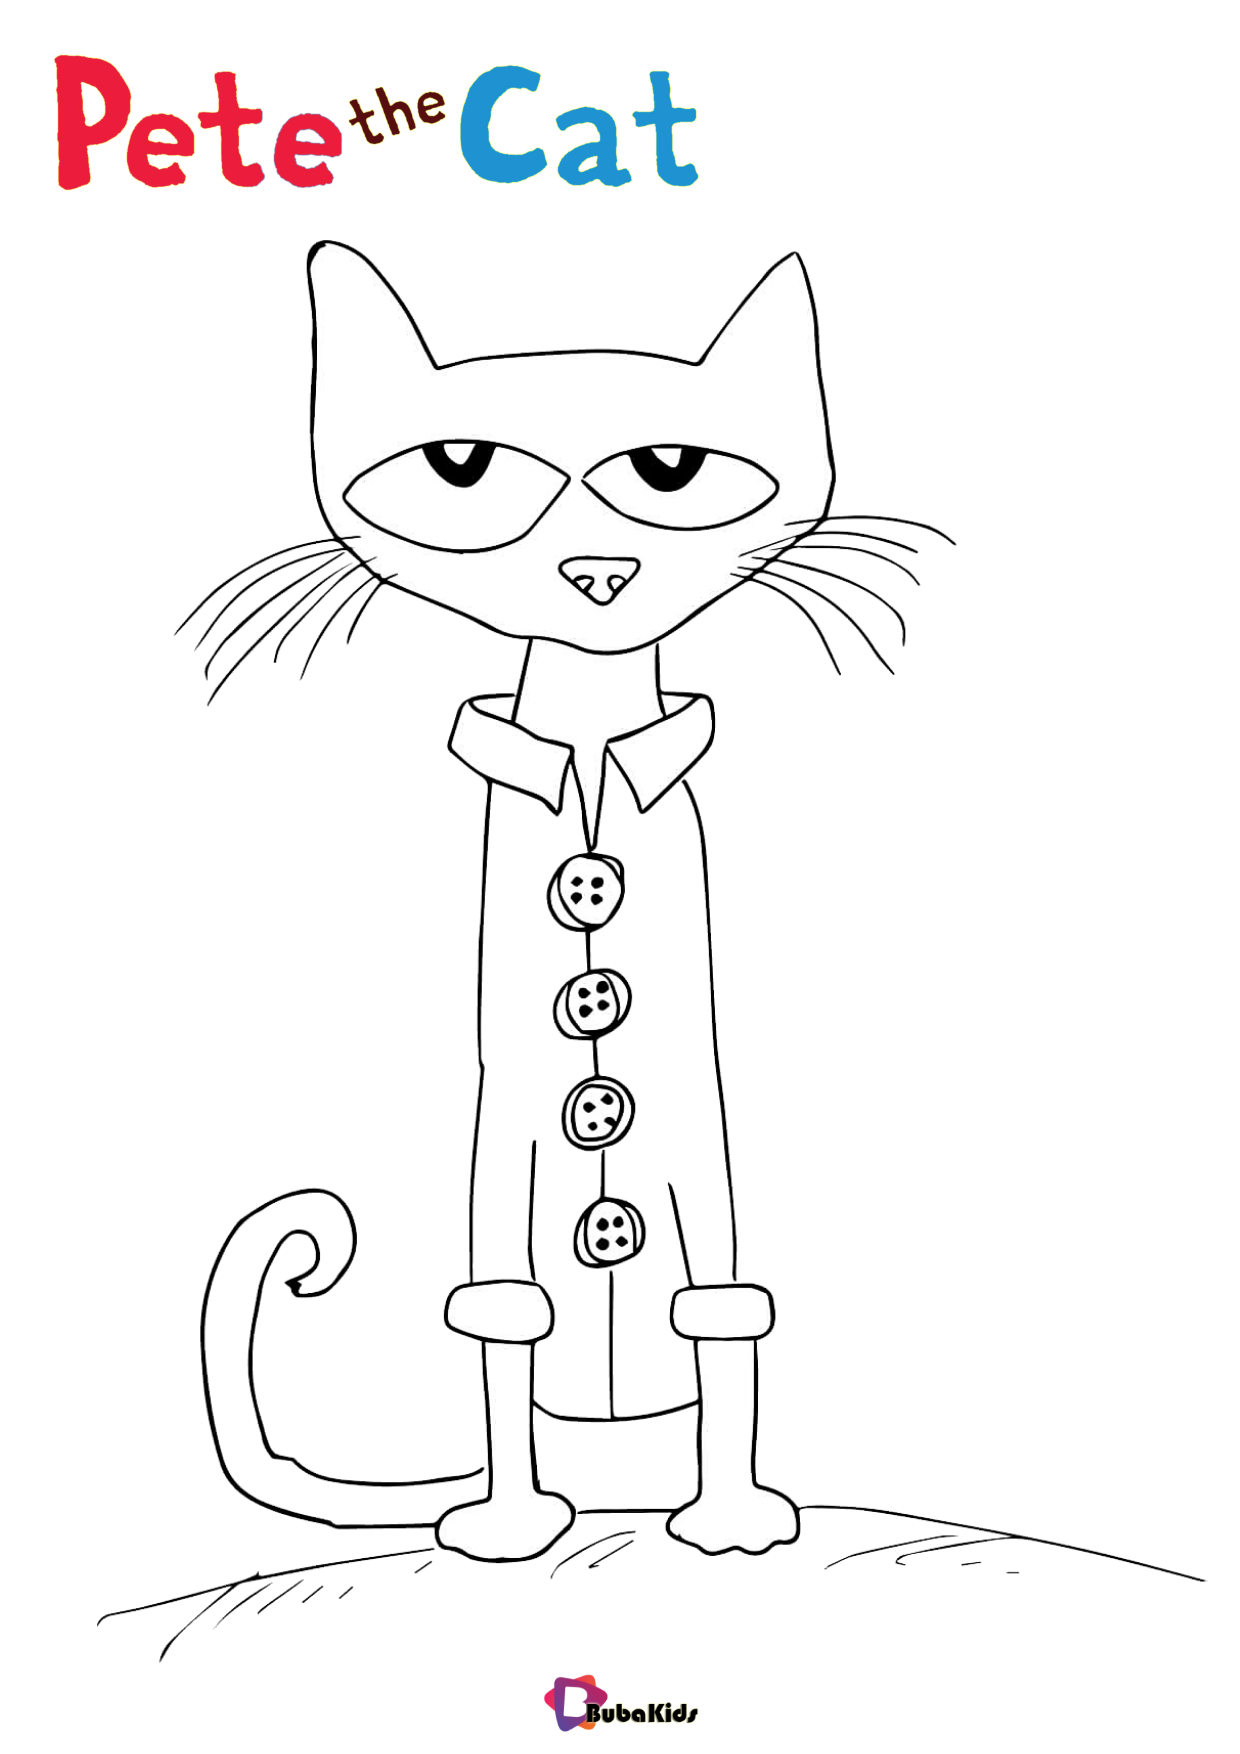 Pete the Cat Cartoon Cat coloring page Wallpaper